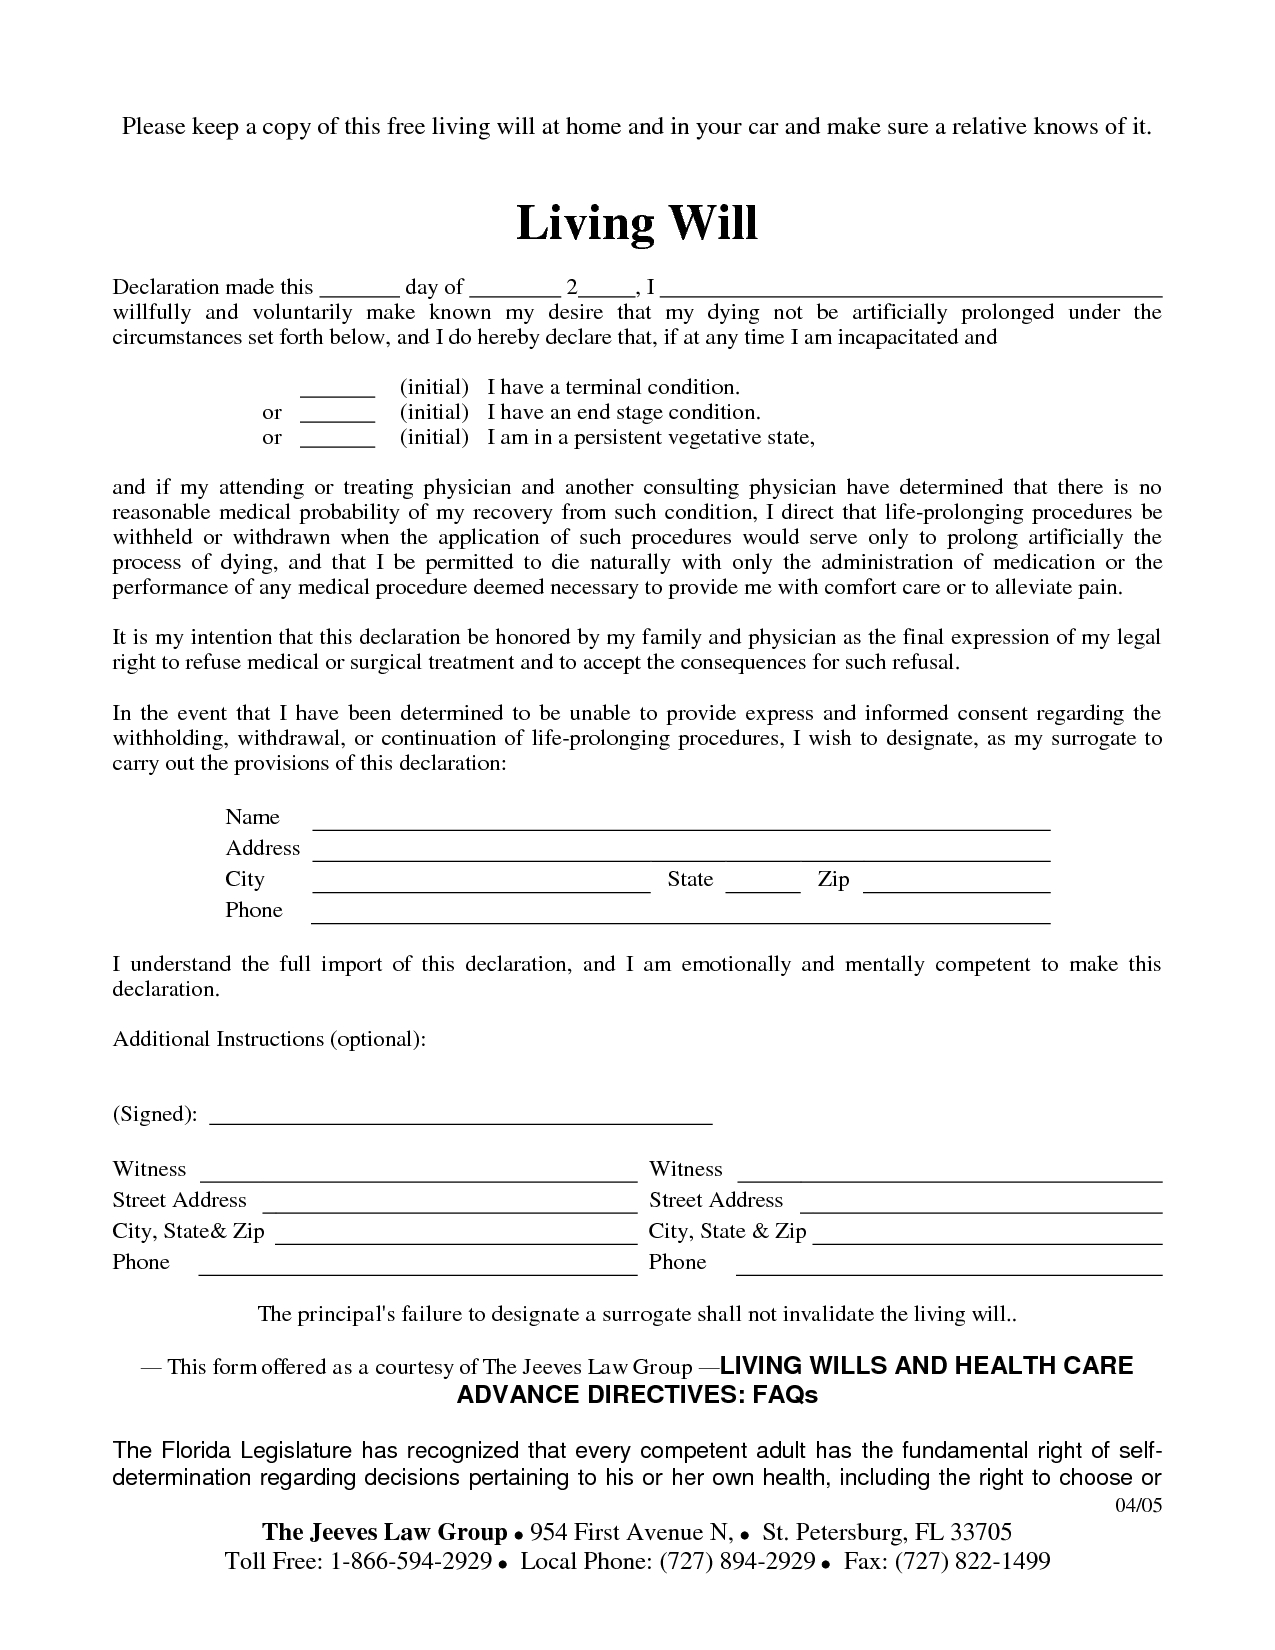 Free Living Will Forms (Advance Directive) Medical Poa Pdf Free